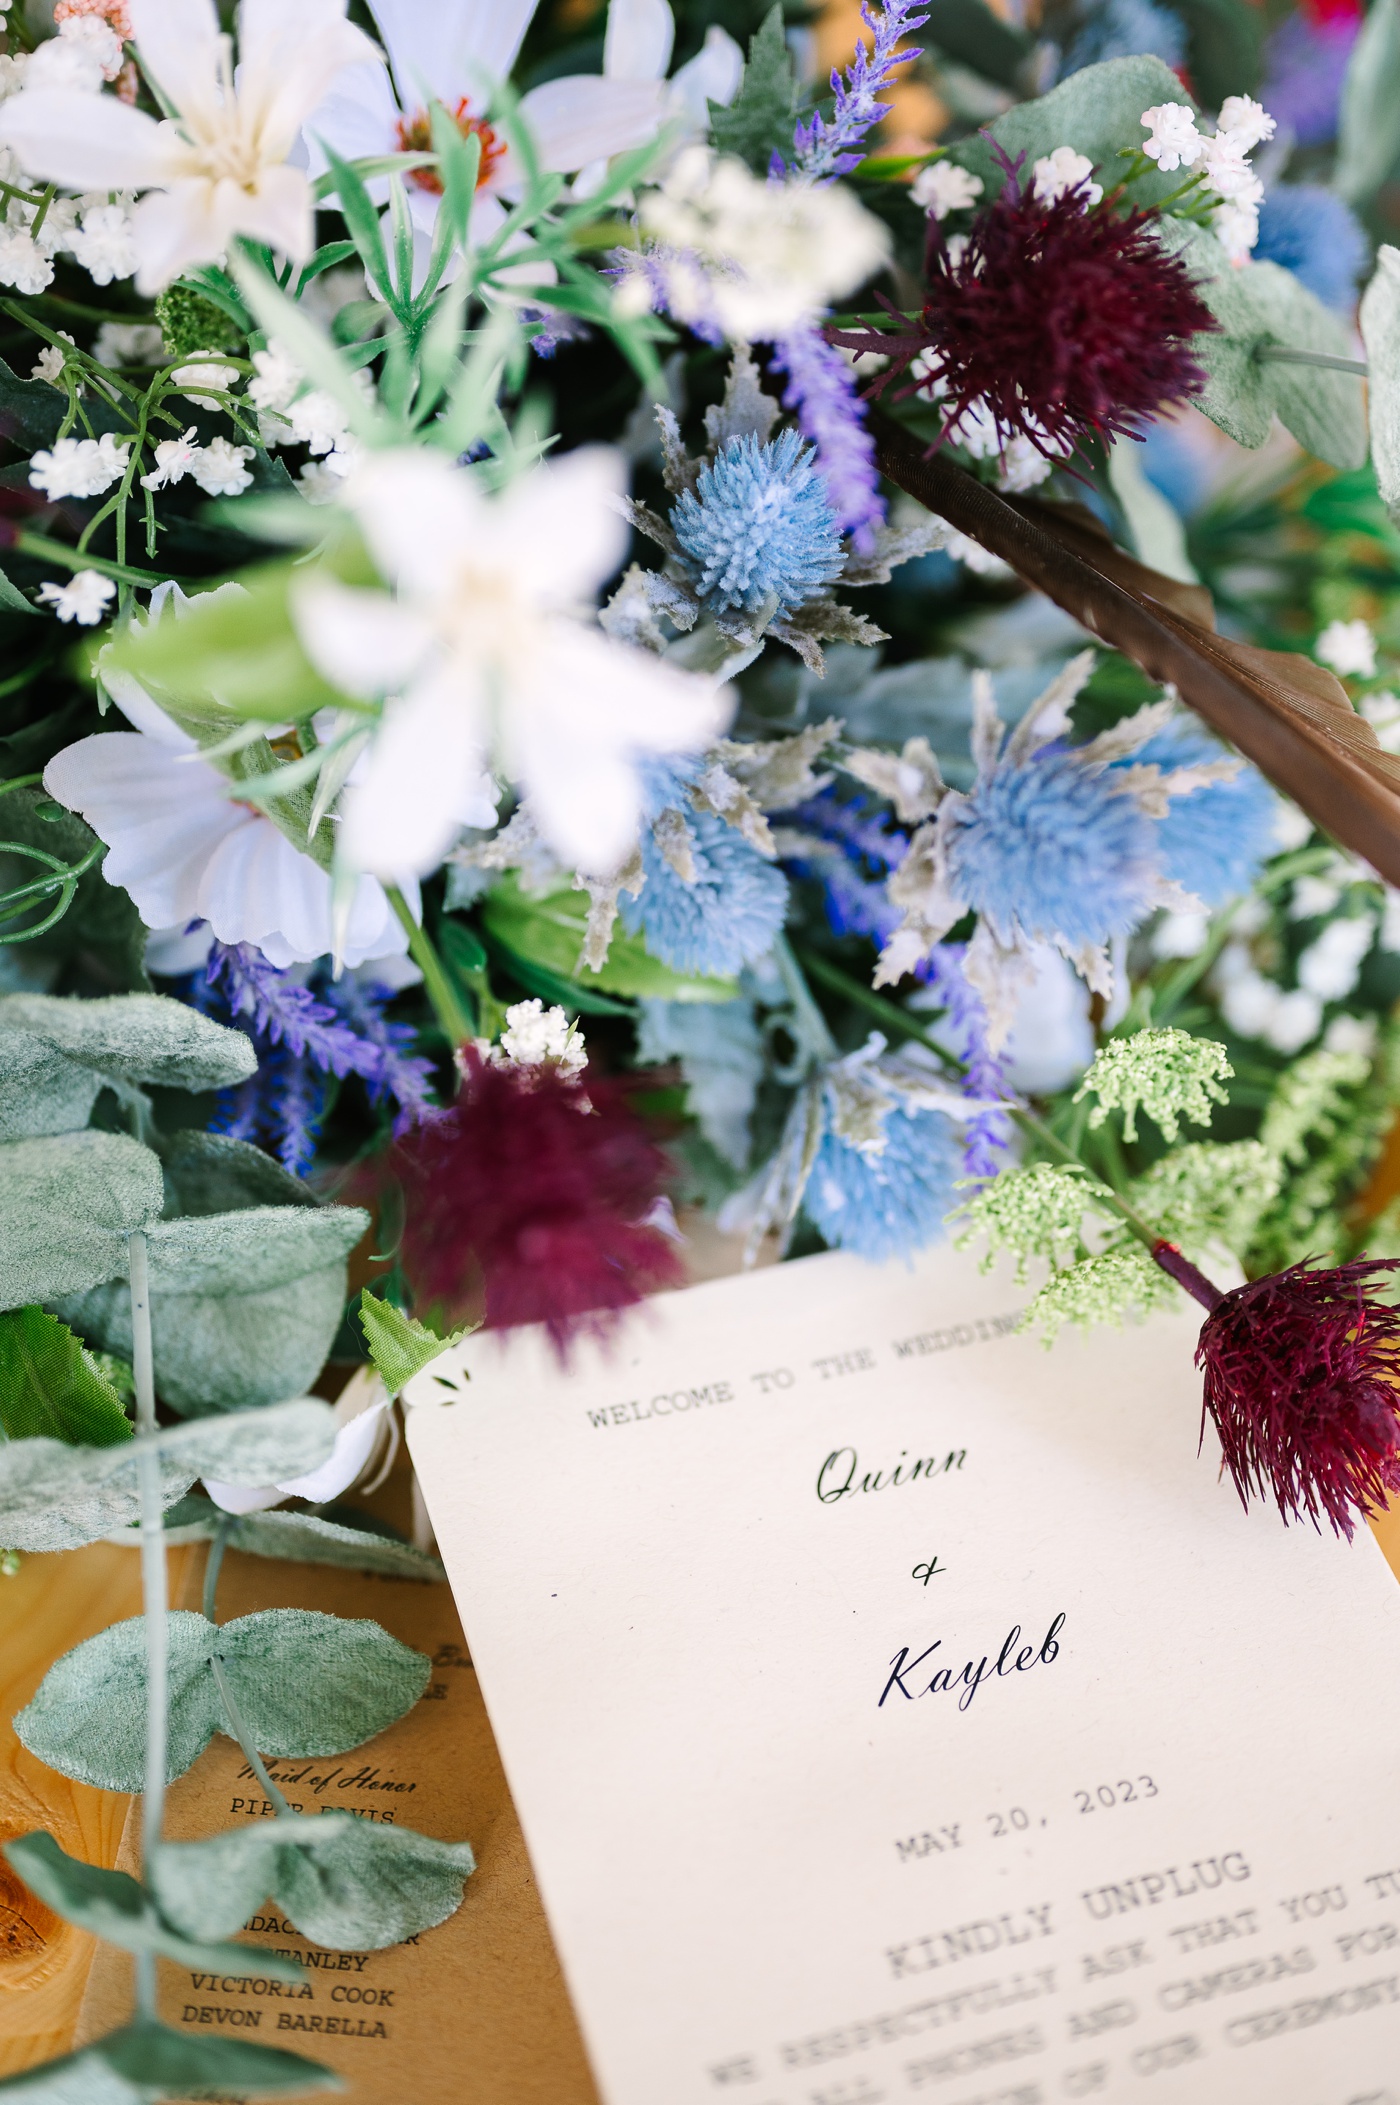 Close-up photo of a blue and purple wedding bouquet with a wedding ceremony program